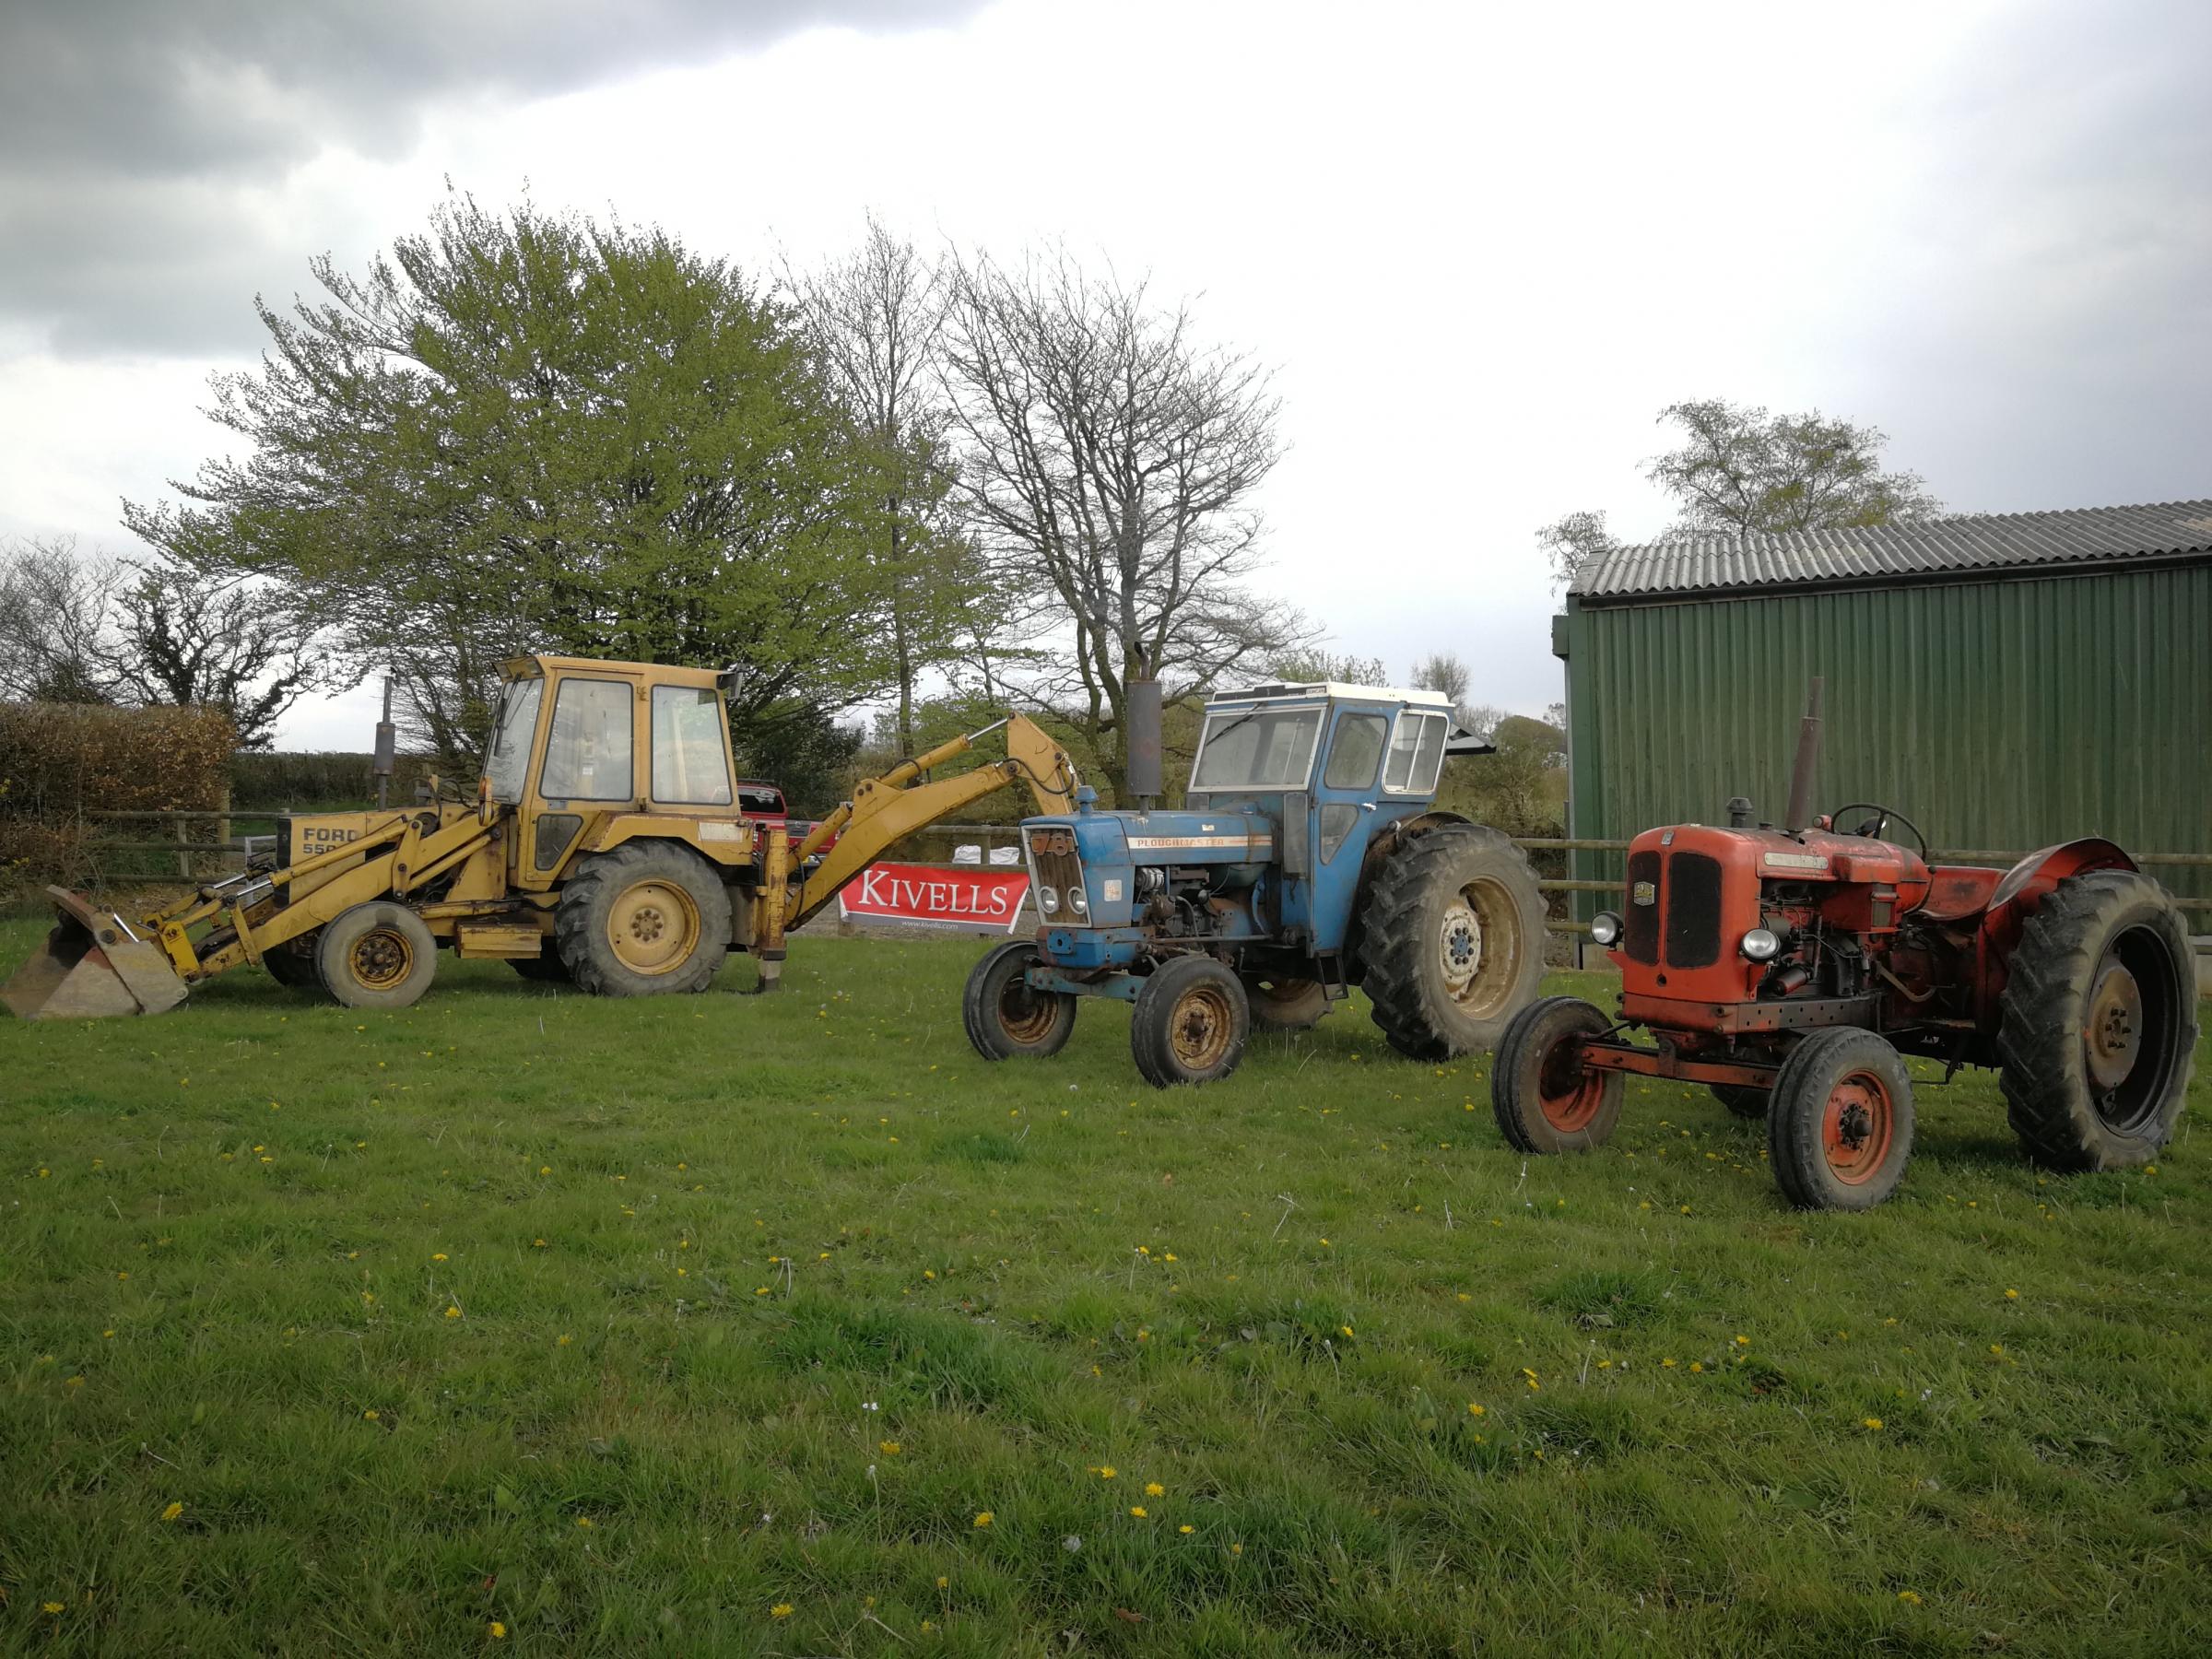 Some of the classic and vintage Ford tractor collection